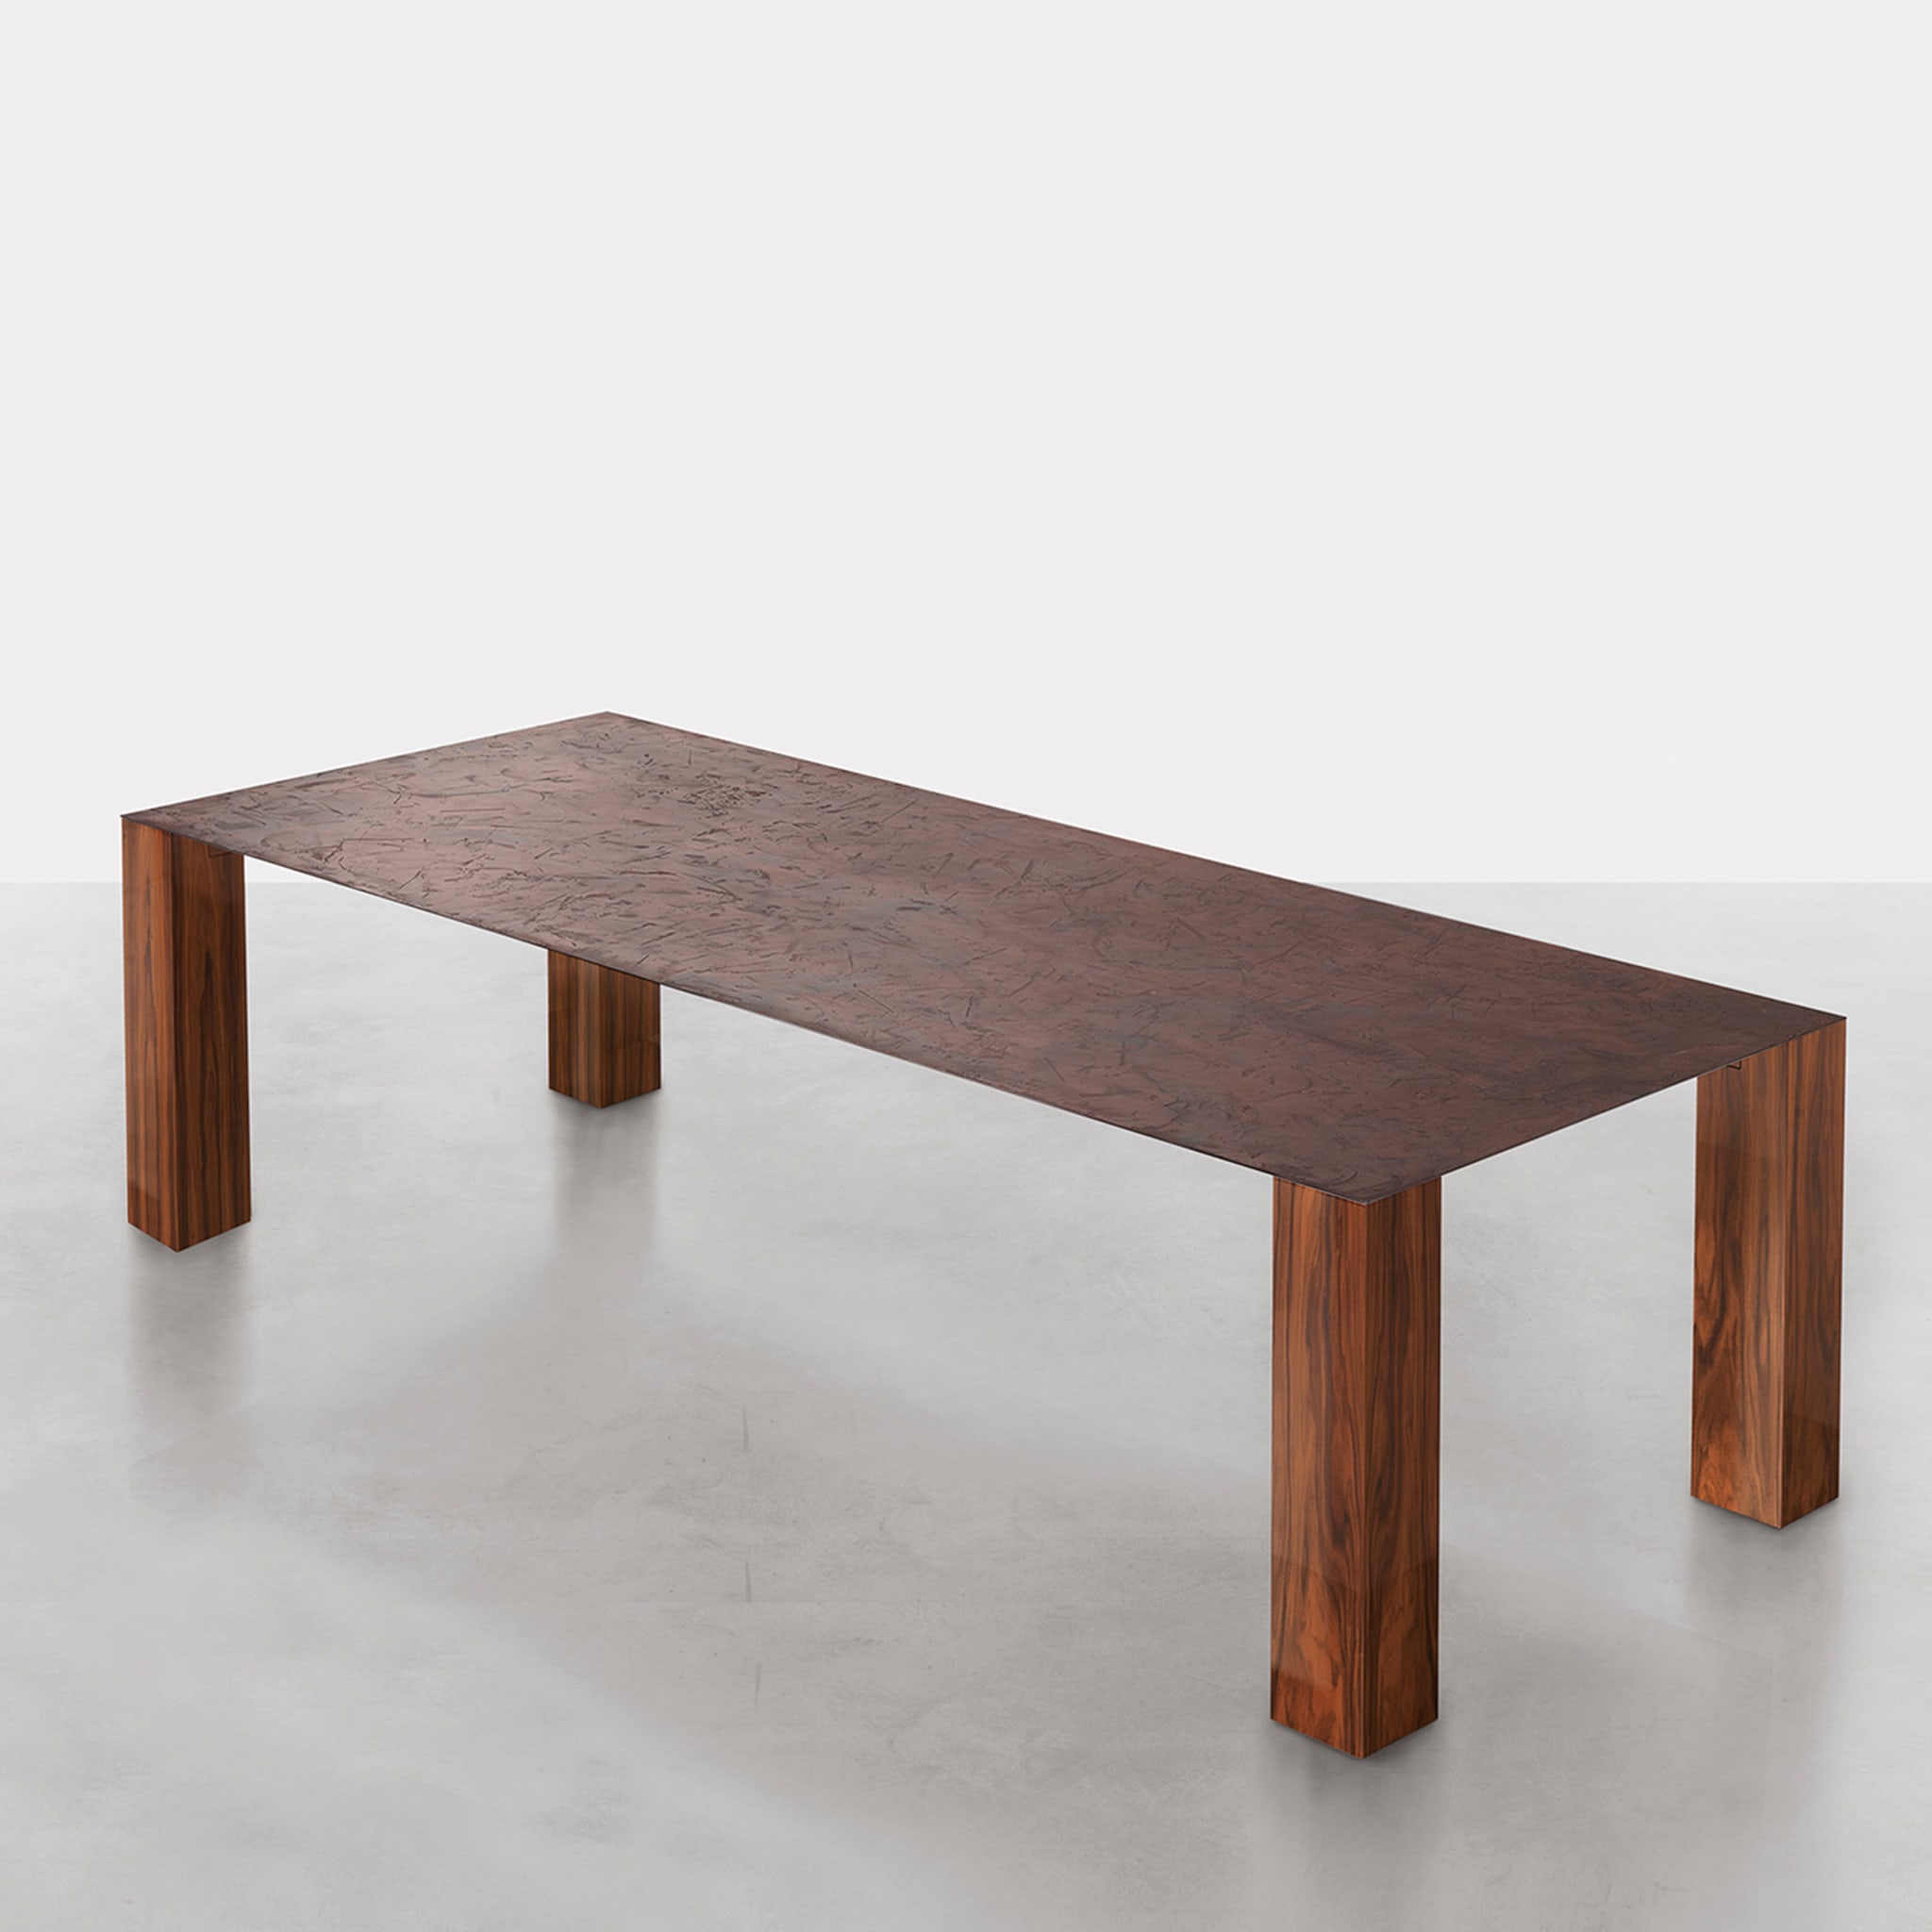 Slim Dining Table by Dainelli Studio - Alternative view 1